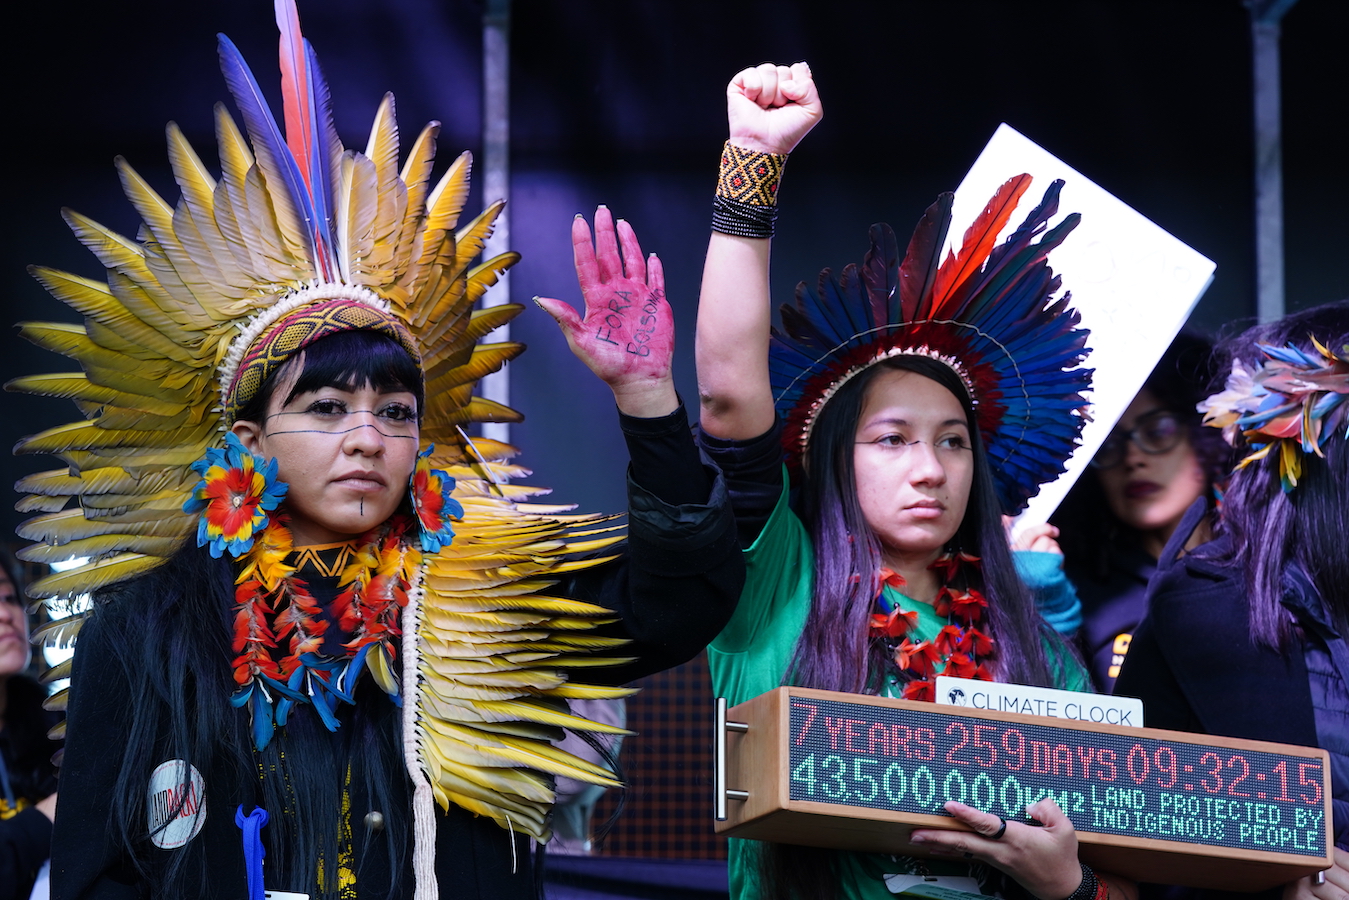 two Indigenous people wearing feathered headdresses raise their hands